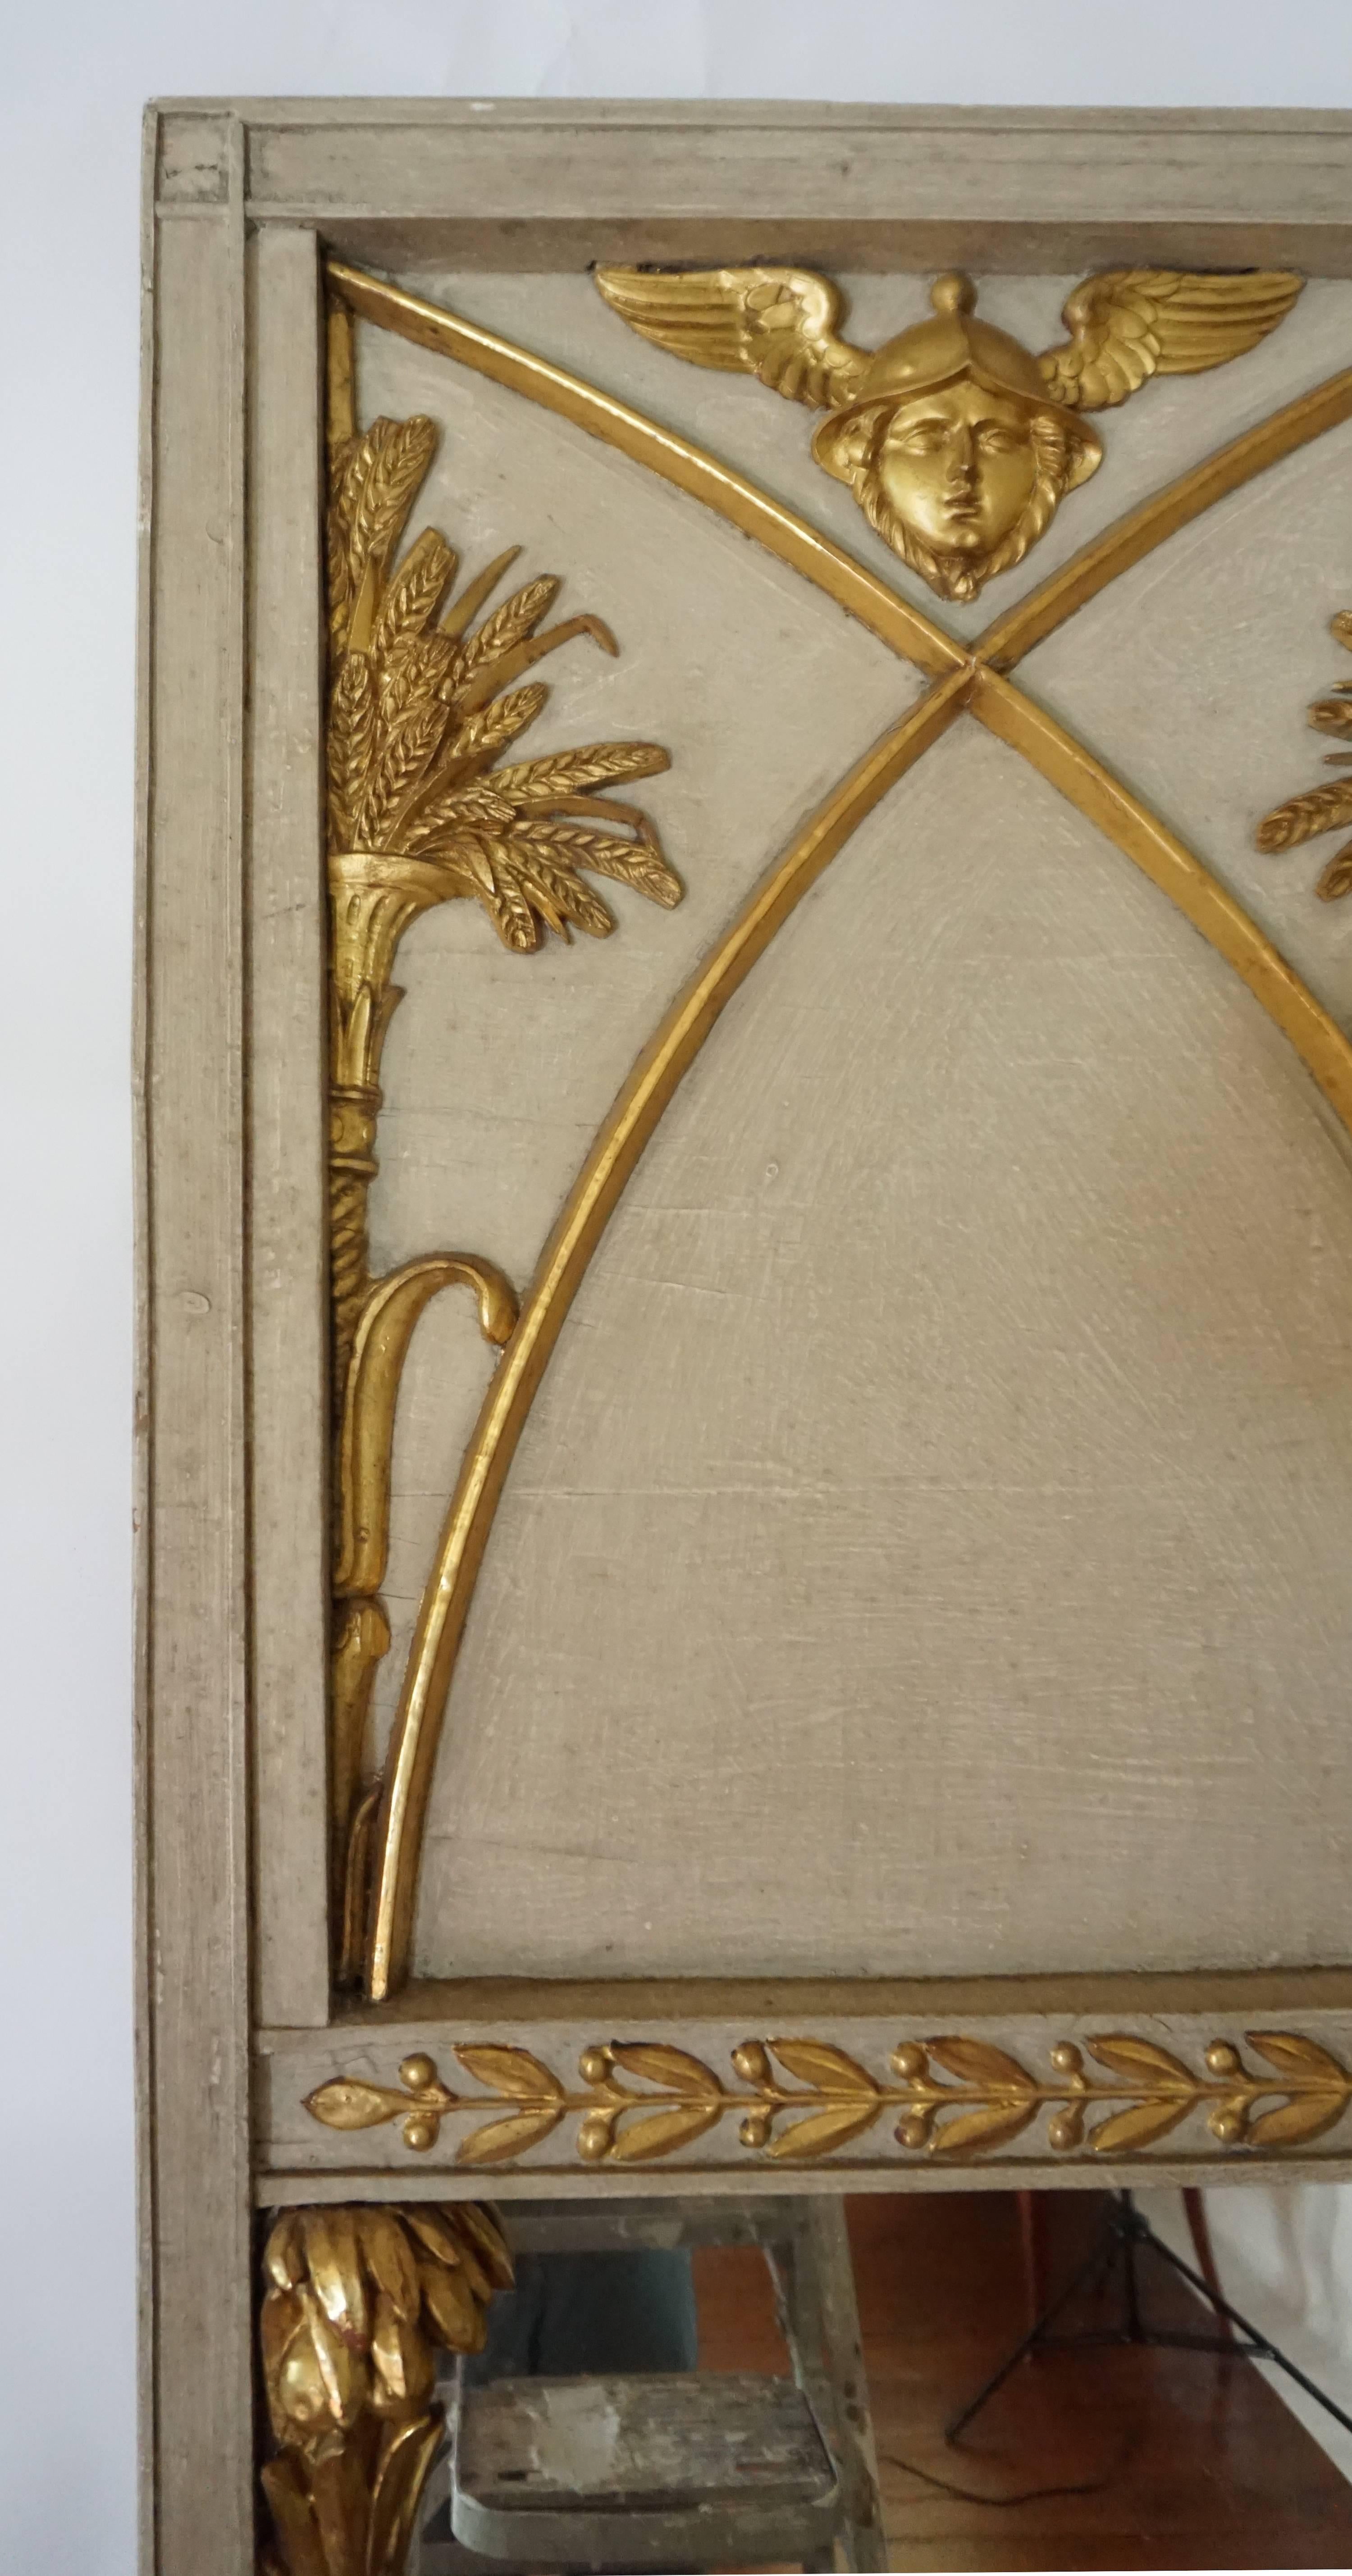 Bronze French Directoire Trumeau Mirror of Monumental Scale, circa 1800